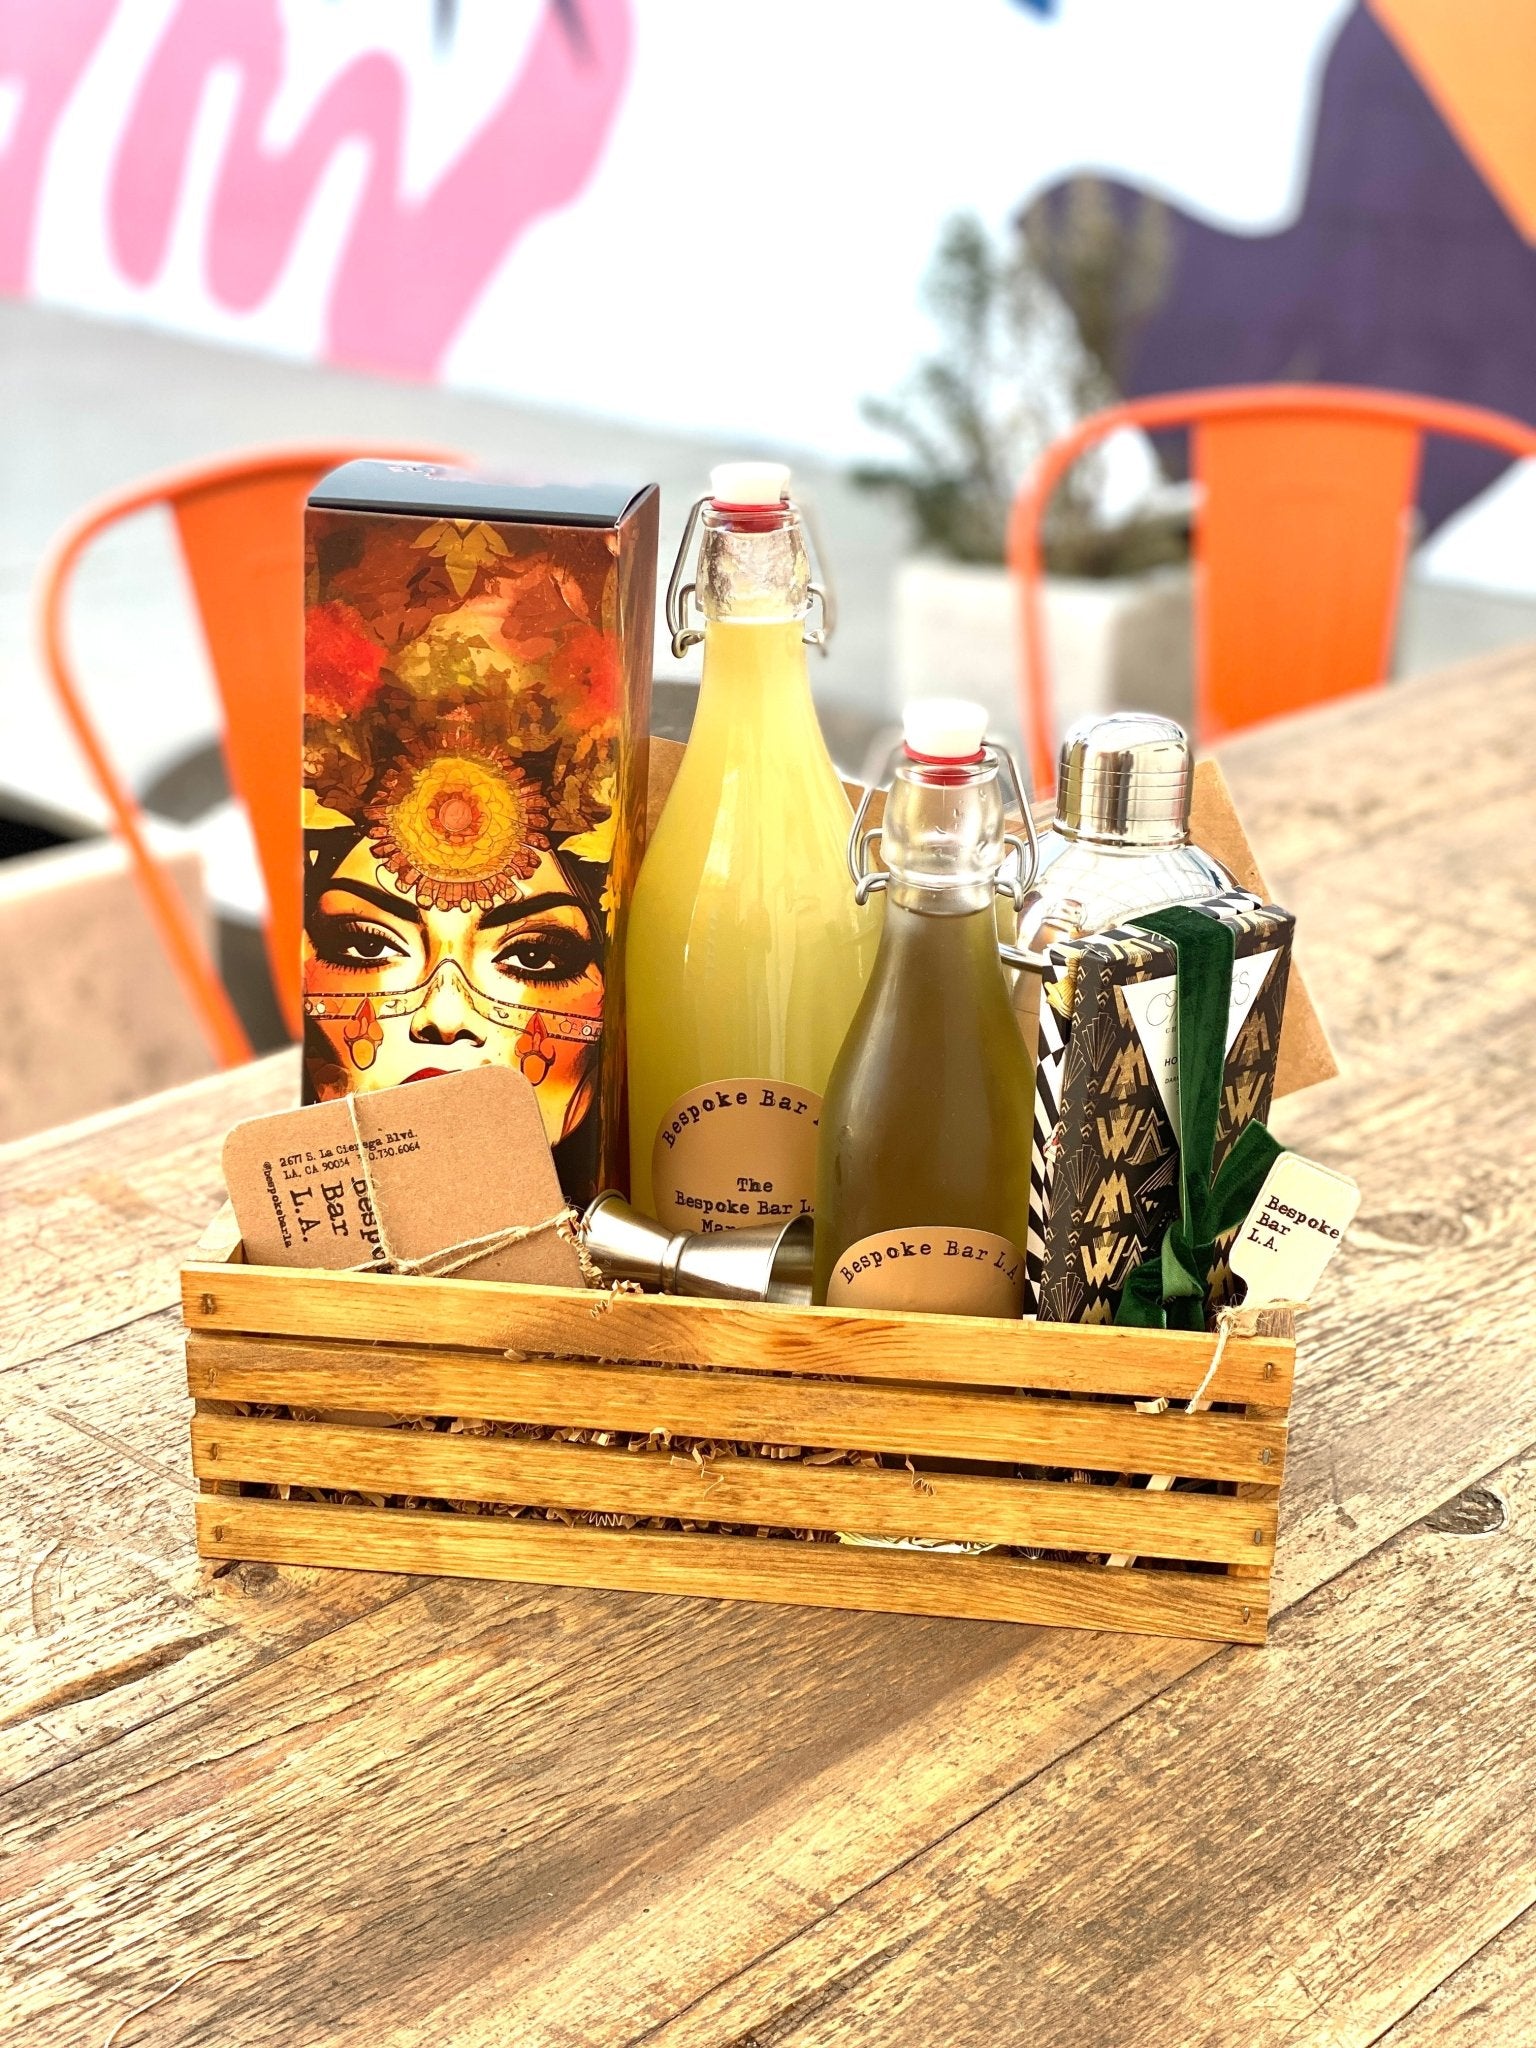 The El Tequinelo Anejo Margarita Box with Compartés Chocolates - Bespoke Bar L.A.